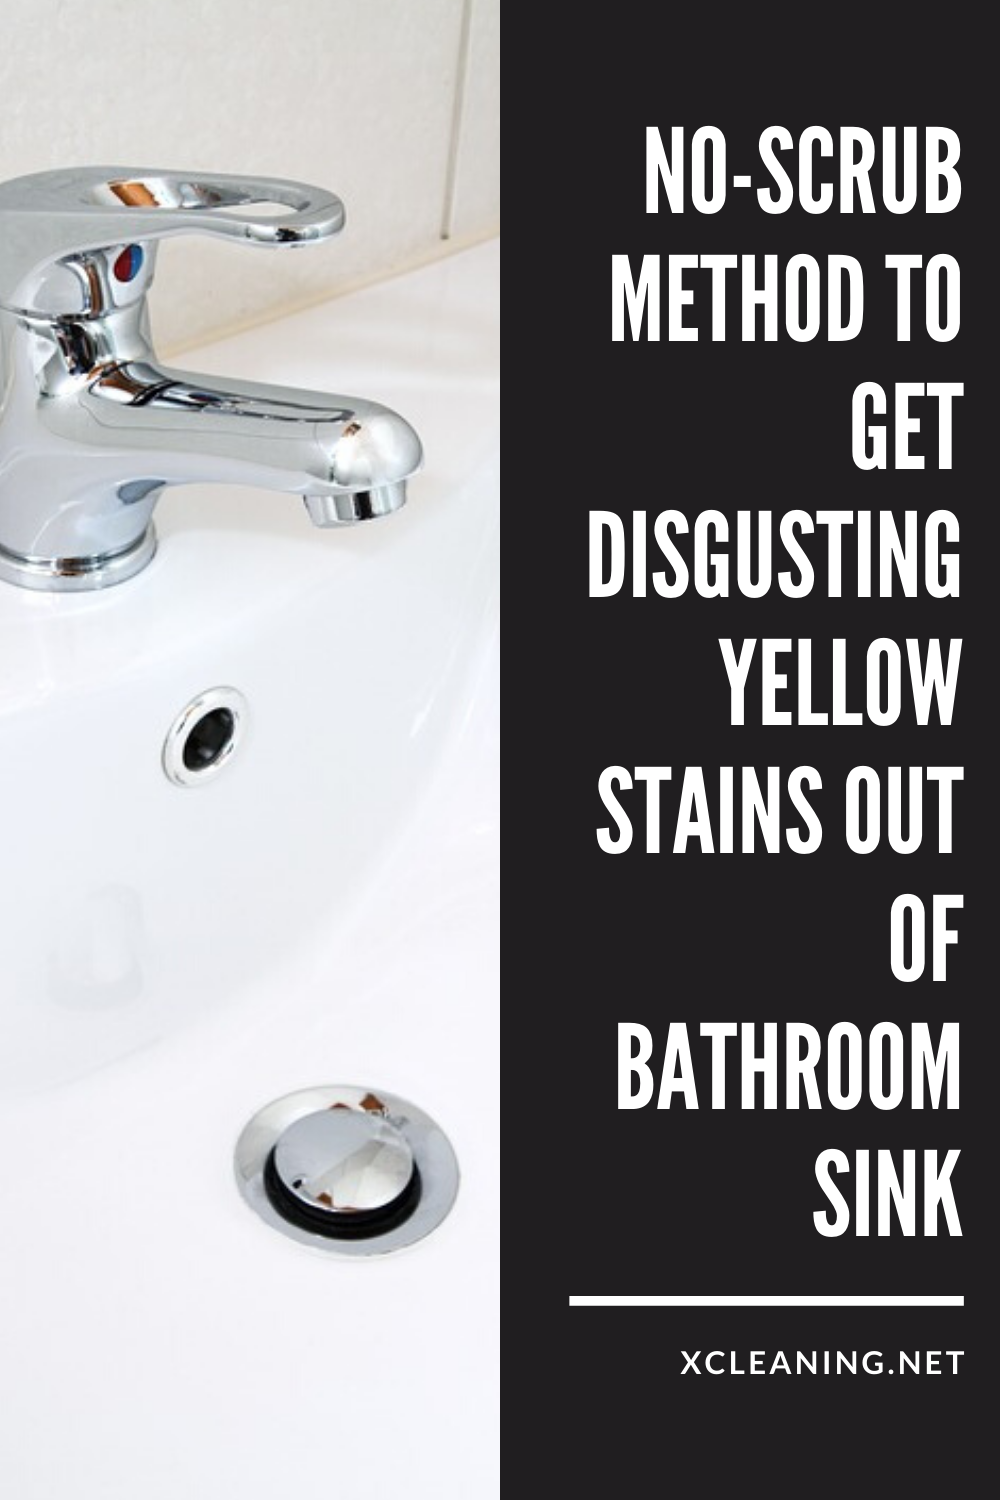 No Scrub Method To Get Disgusting Yellow Stains Out Of Bathroom Sink Xcleaningnet Your Cleaning Tips